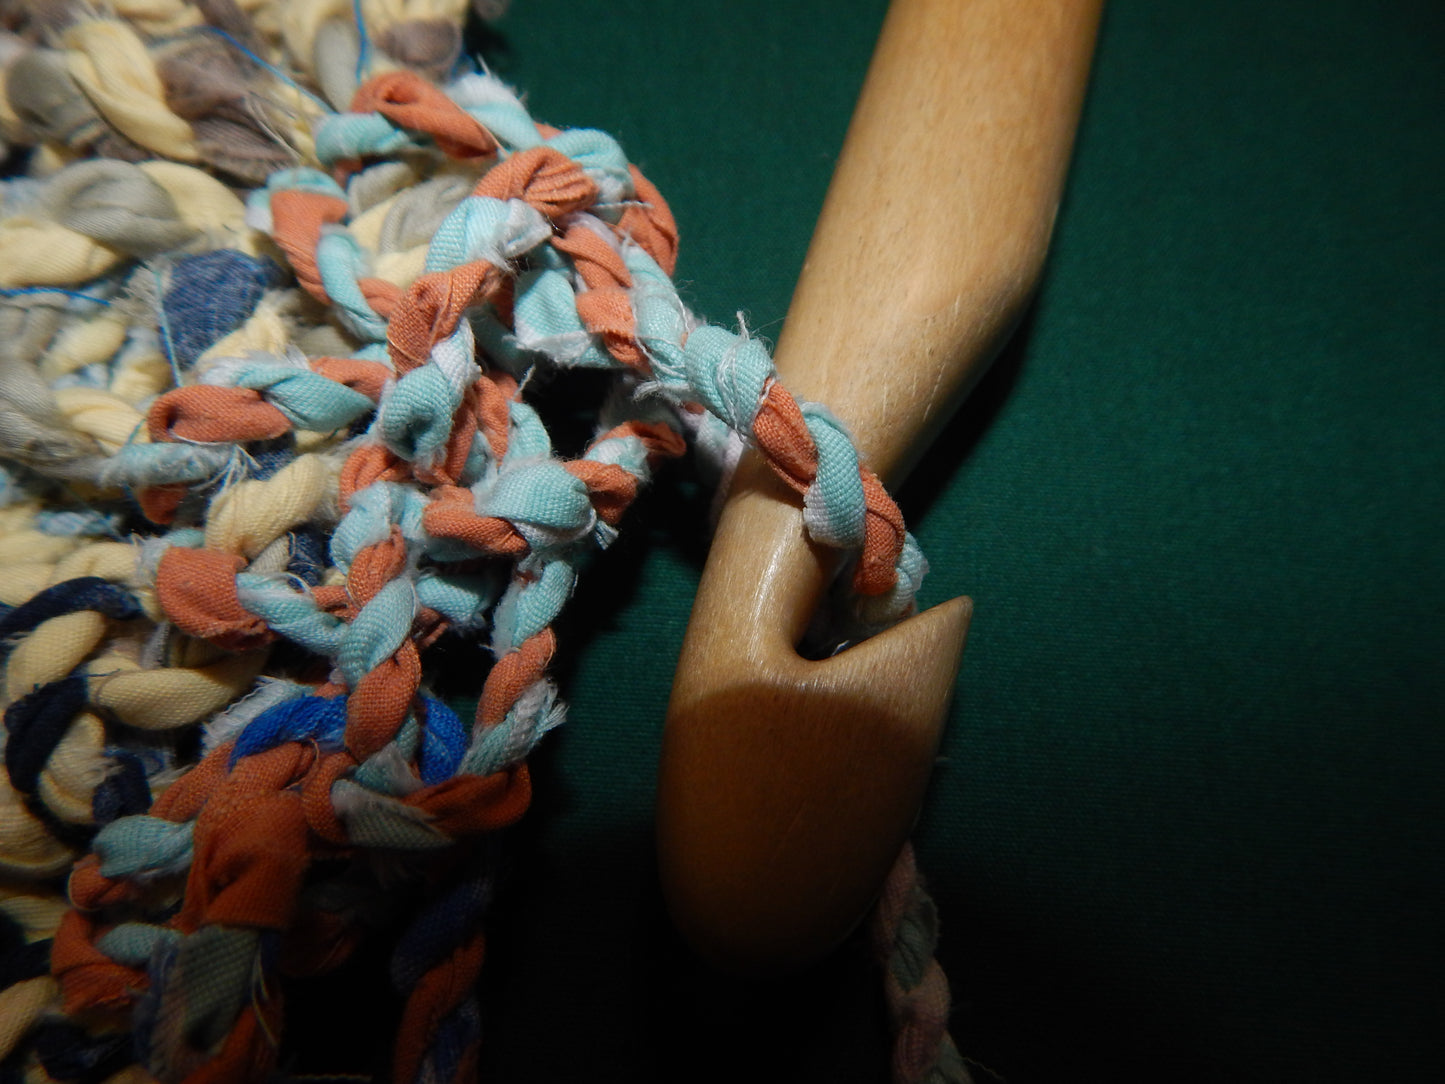 Learn How to Make Twine out of Scraps of Fabric and Projects You Can Make with the Twine